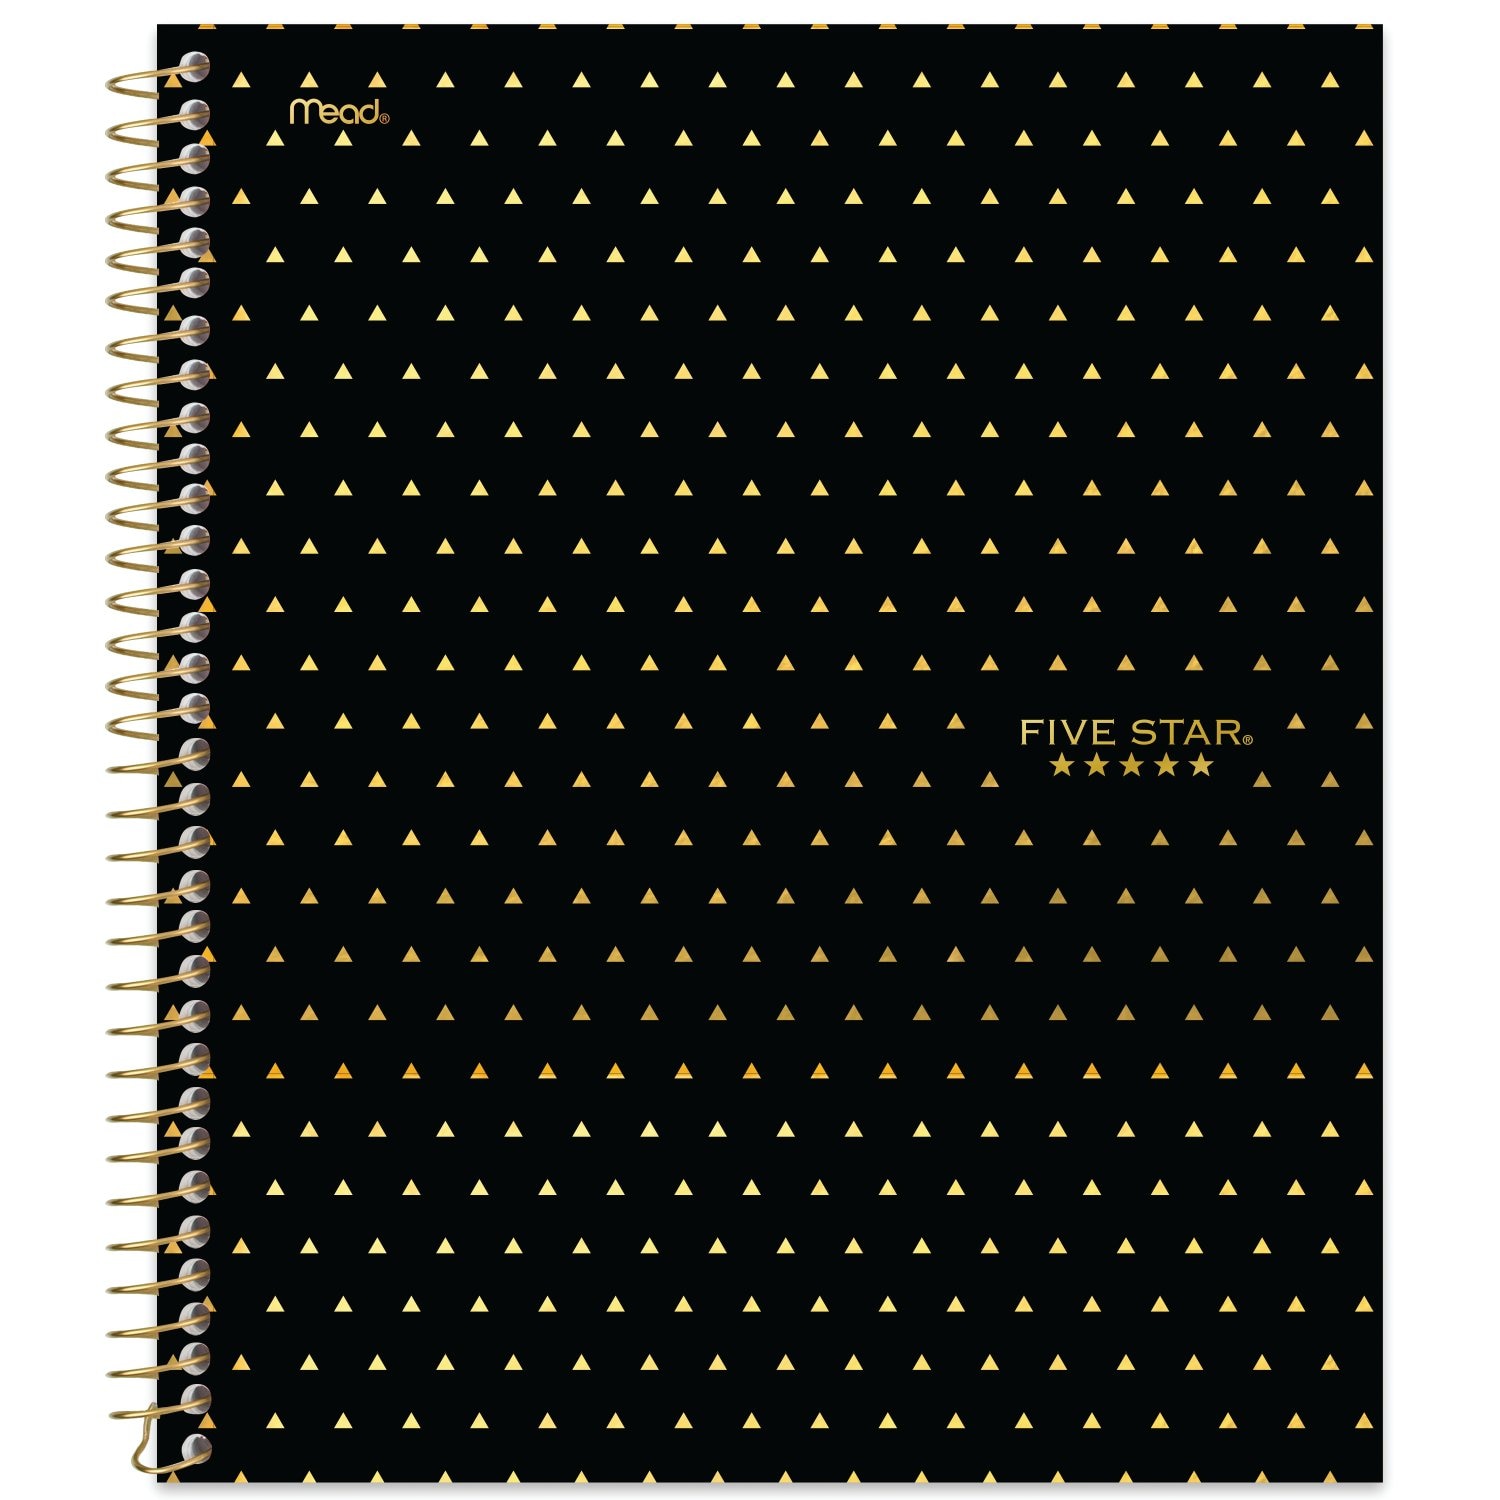 Five Star Style 1 Subject Notebook